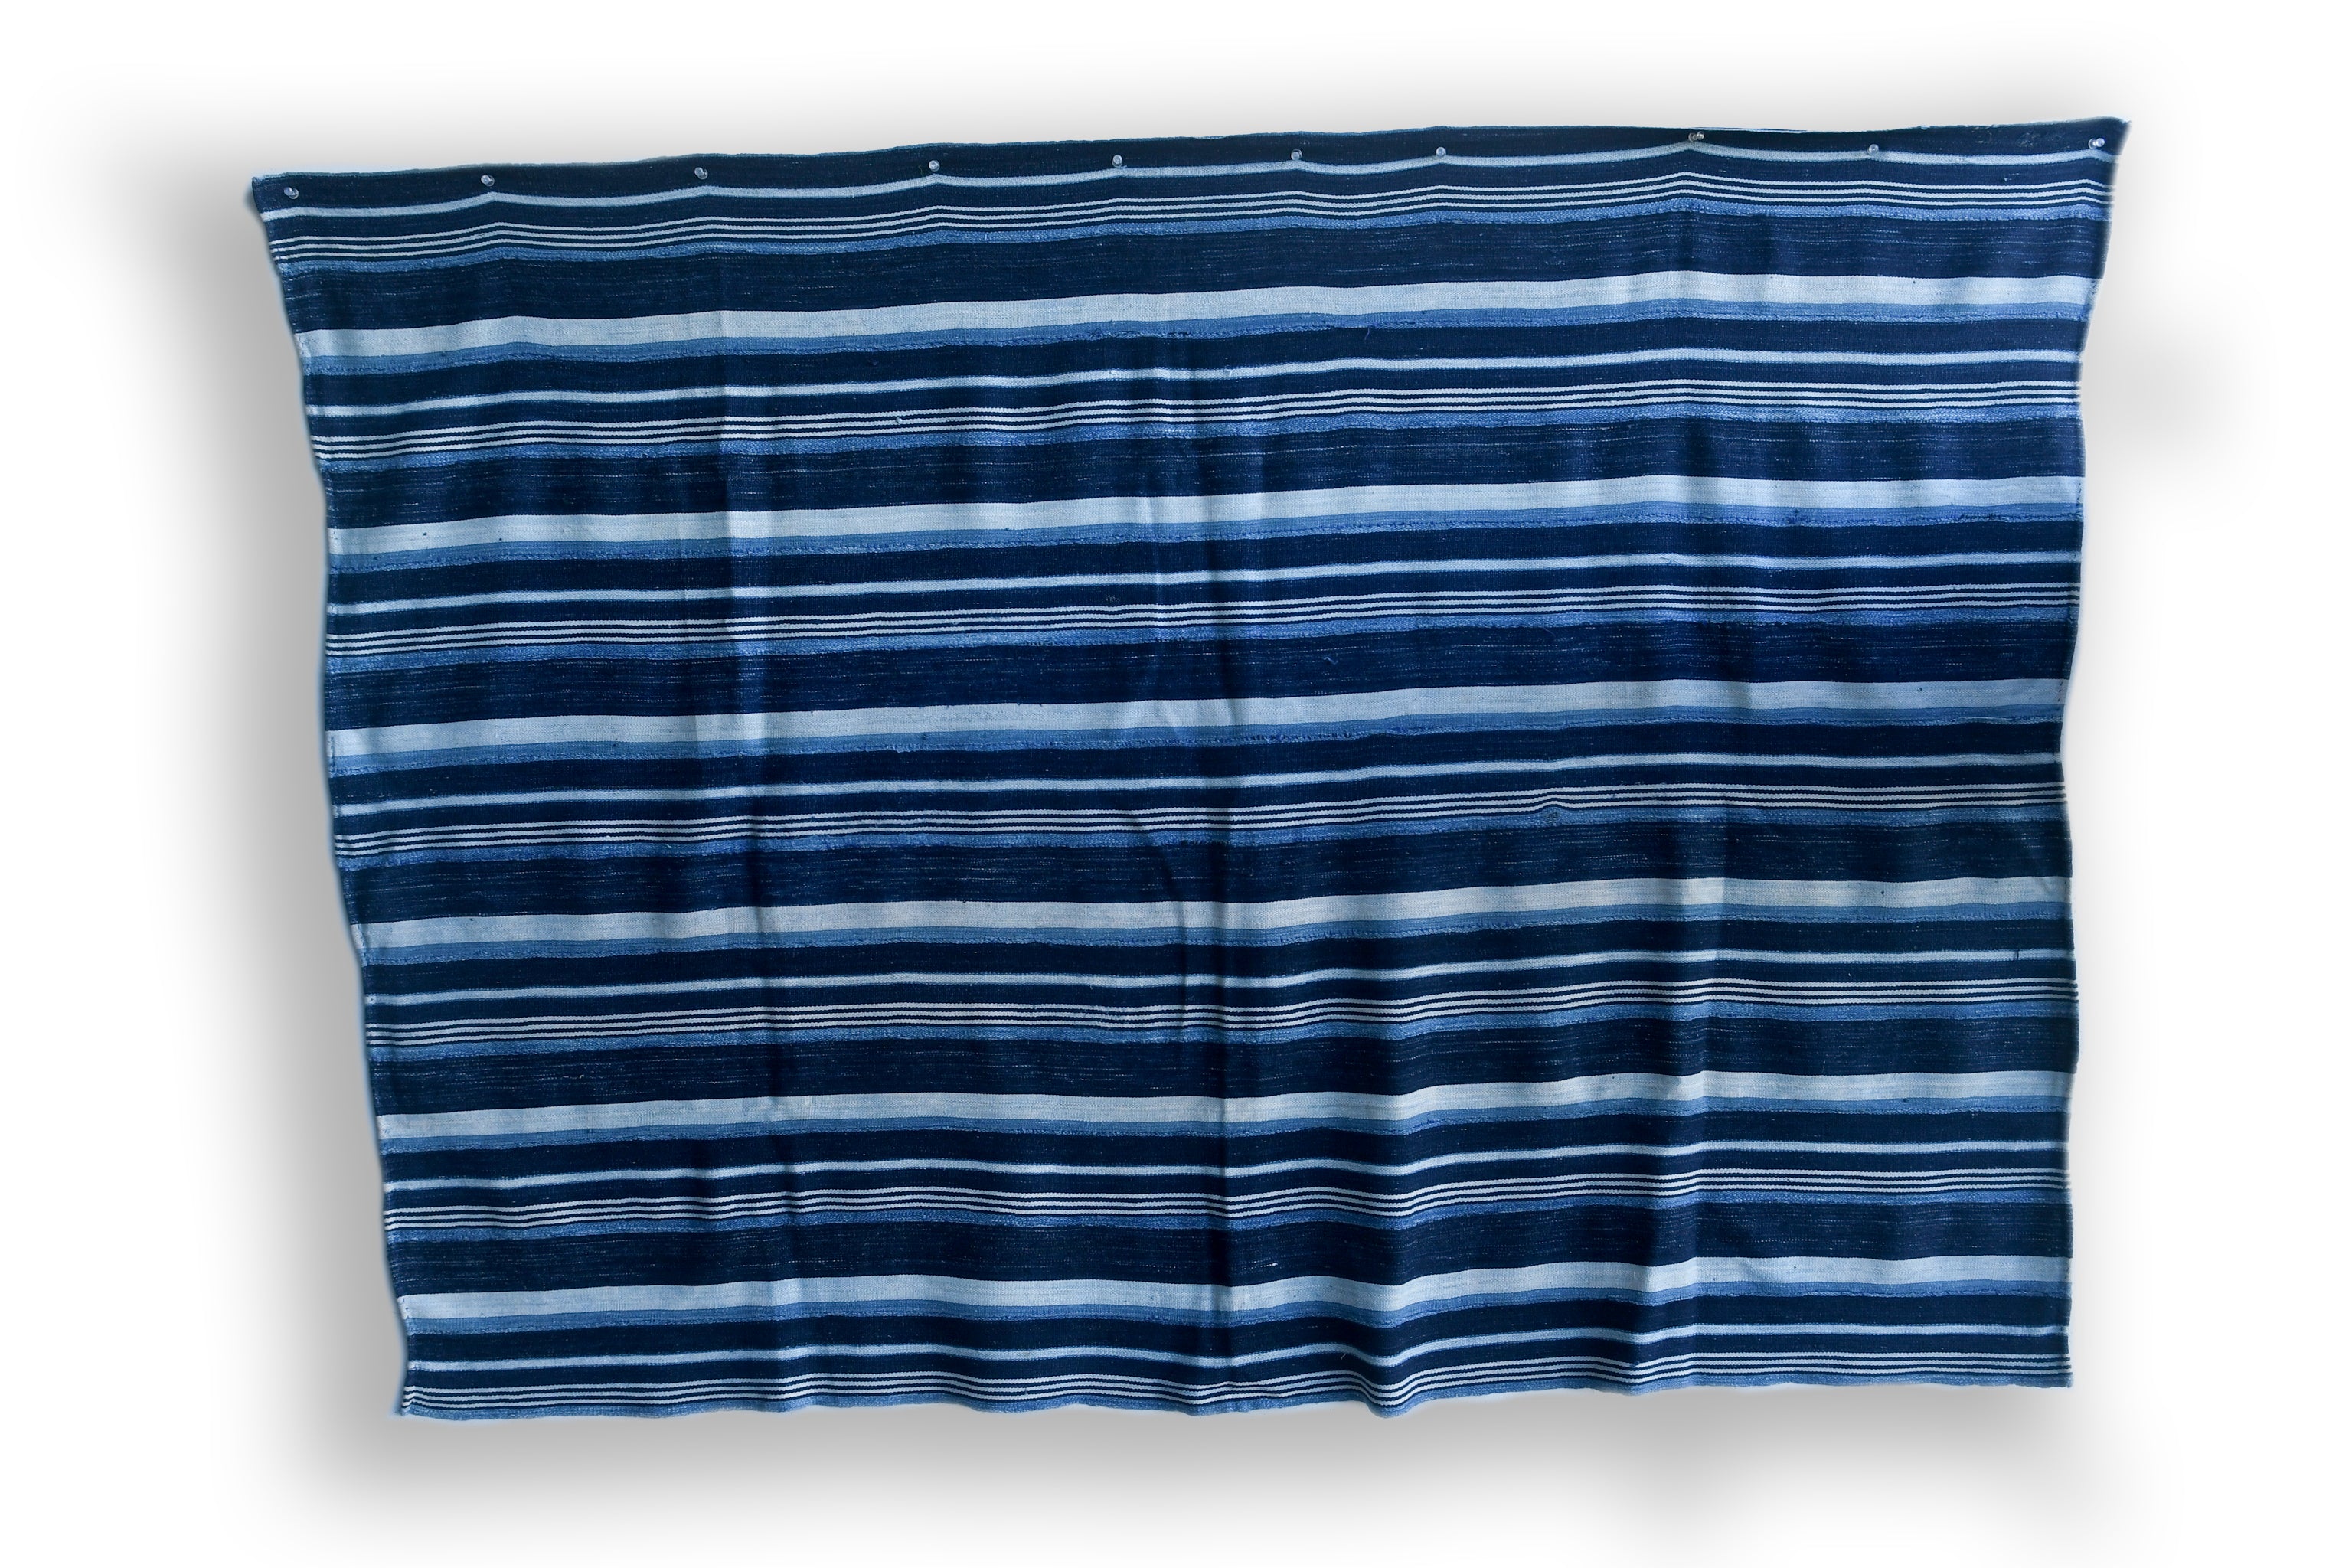 Handcrafted Textiles - Artisan Designed - Handcrafted African Art Textiles - Home Decor - Living Spaces - Mix Colors - Bold Patterns - Traditional Designs - African Culture - This Striped Textile is constructed from Vintage African Cotton material and is distinguished by its Indigo Dyed design. As a home decor accent, it adds a sophisticated yet bold touch to any living space. Length: 62 inches Width: 43 inches